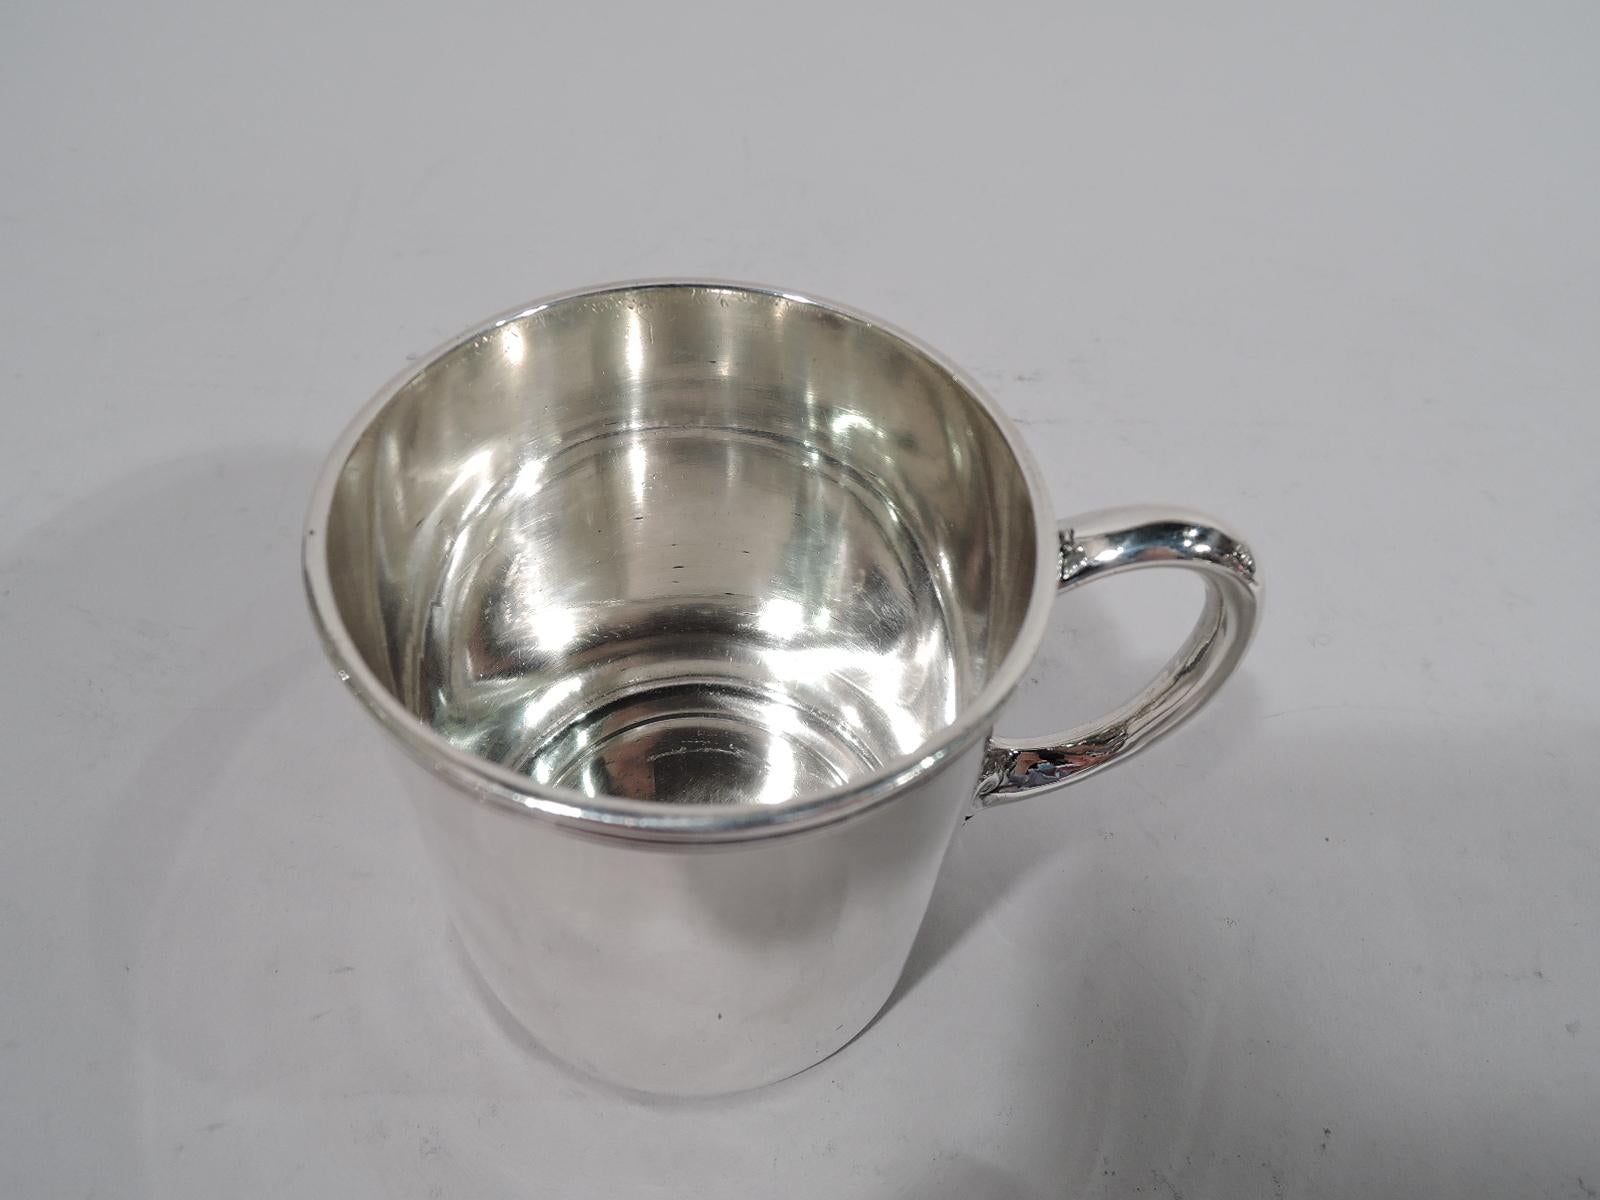 American classical sterling silver baby cup. Made by Tiffany & Co. in New York. Straight sides with curved bottom, reeded rim, and leaf-mounted C-scroll handle. Spare elegance with room for engraving. Fully marked including pattern no. 4105 and